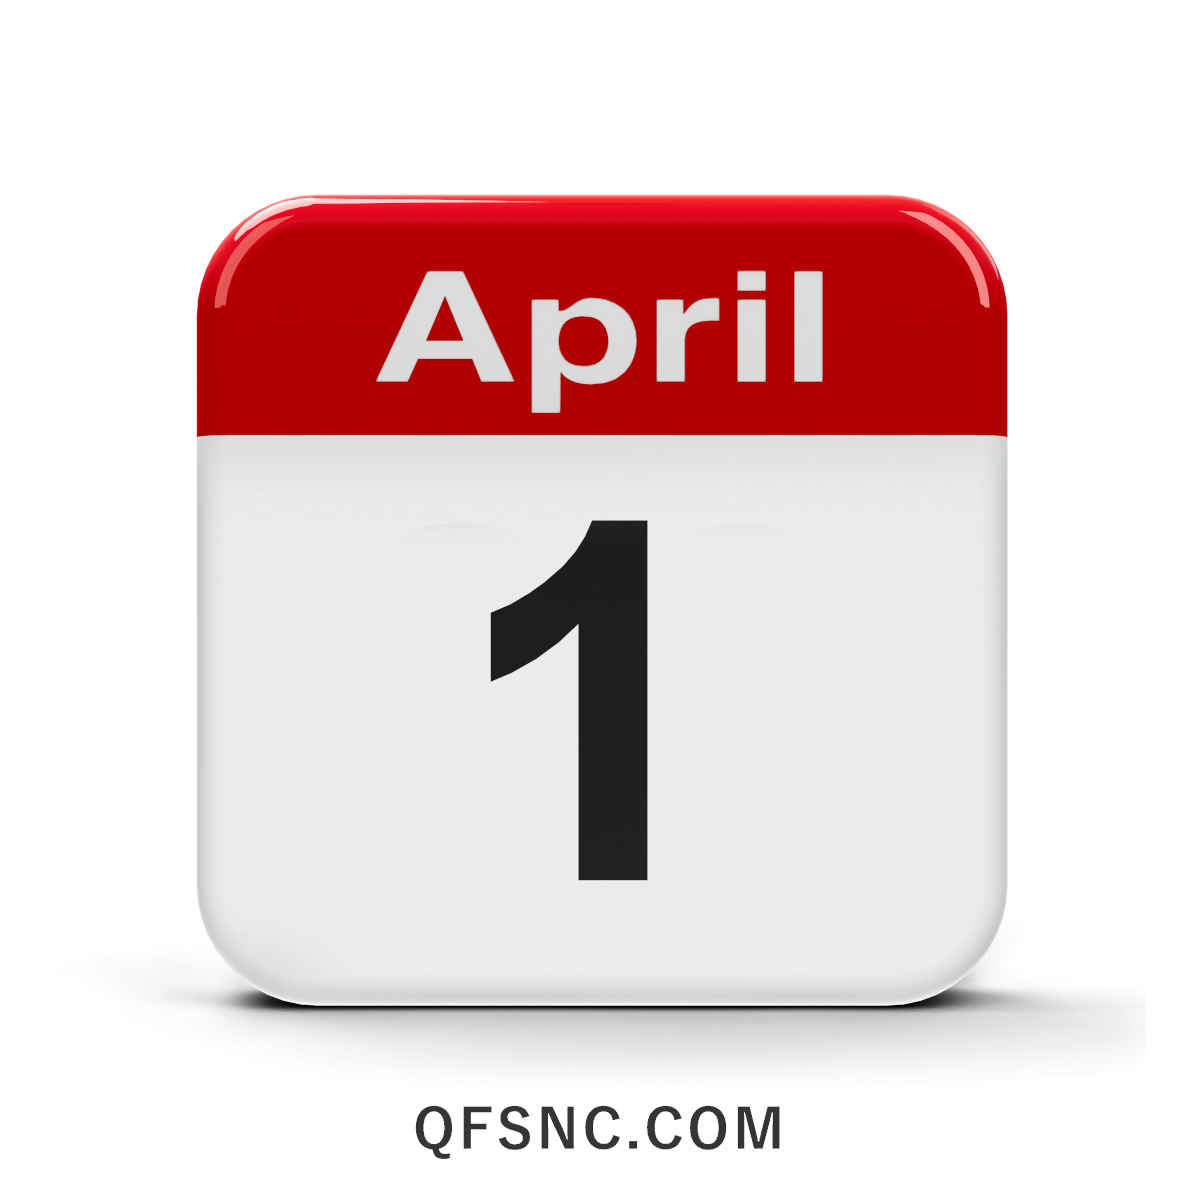 April 1st used to be the first day of the year, until the calendar was changed in 1752 without letting everyone know and causing a lot of people to be fooled. Now, April 1st is known as April Fools Day. 😊😊😊😊😊😊😊😊😊😊 The Team At Quality Family Services #CharlotteNC